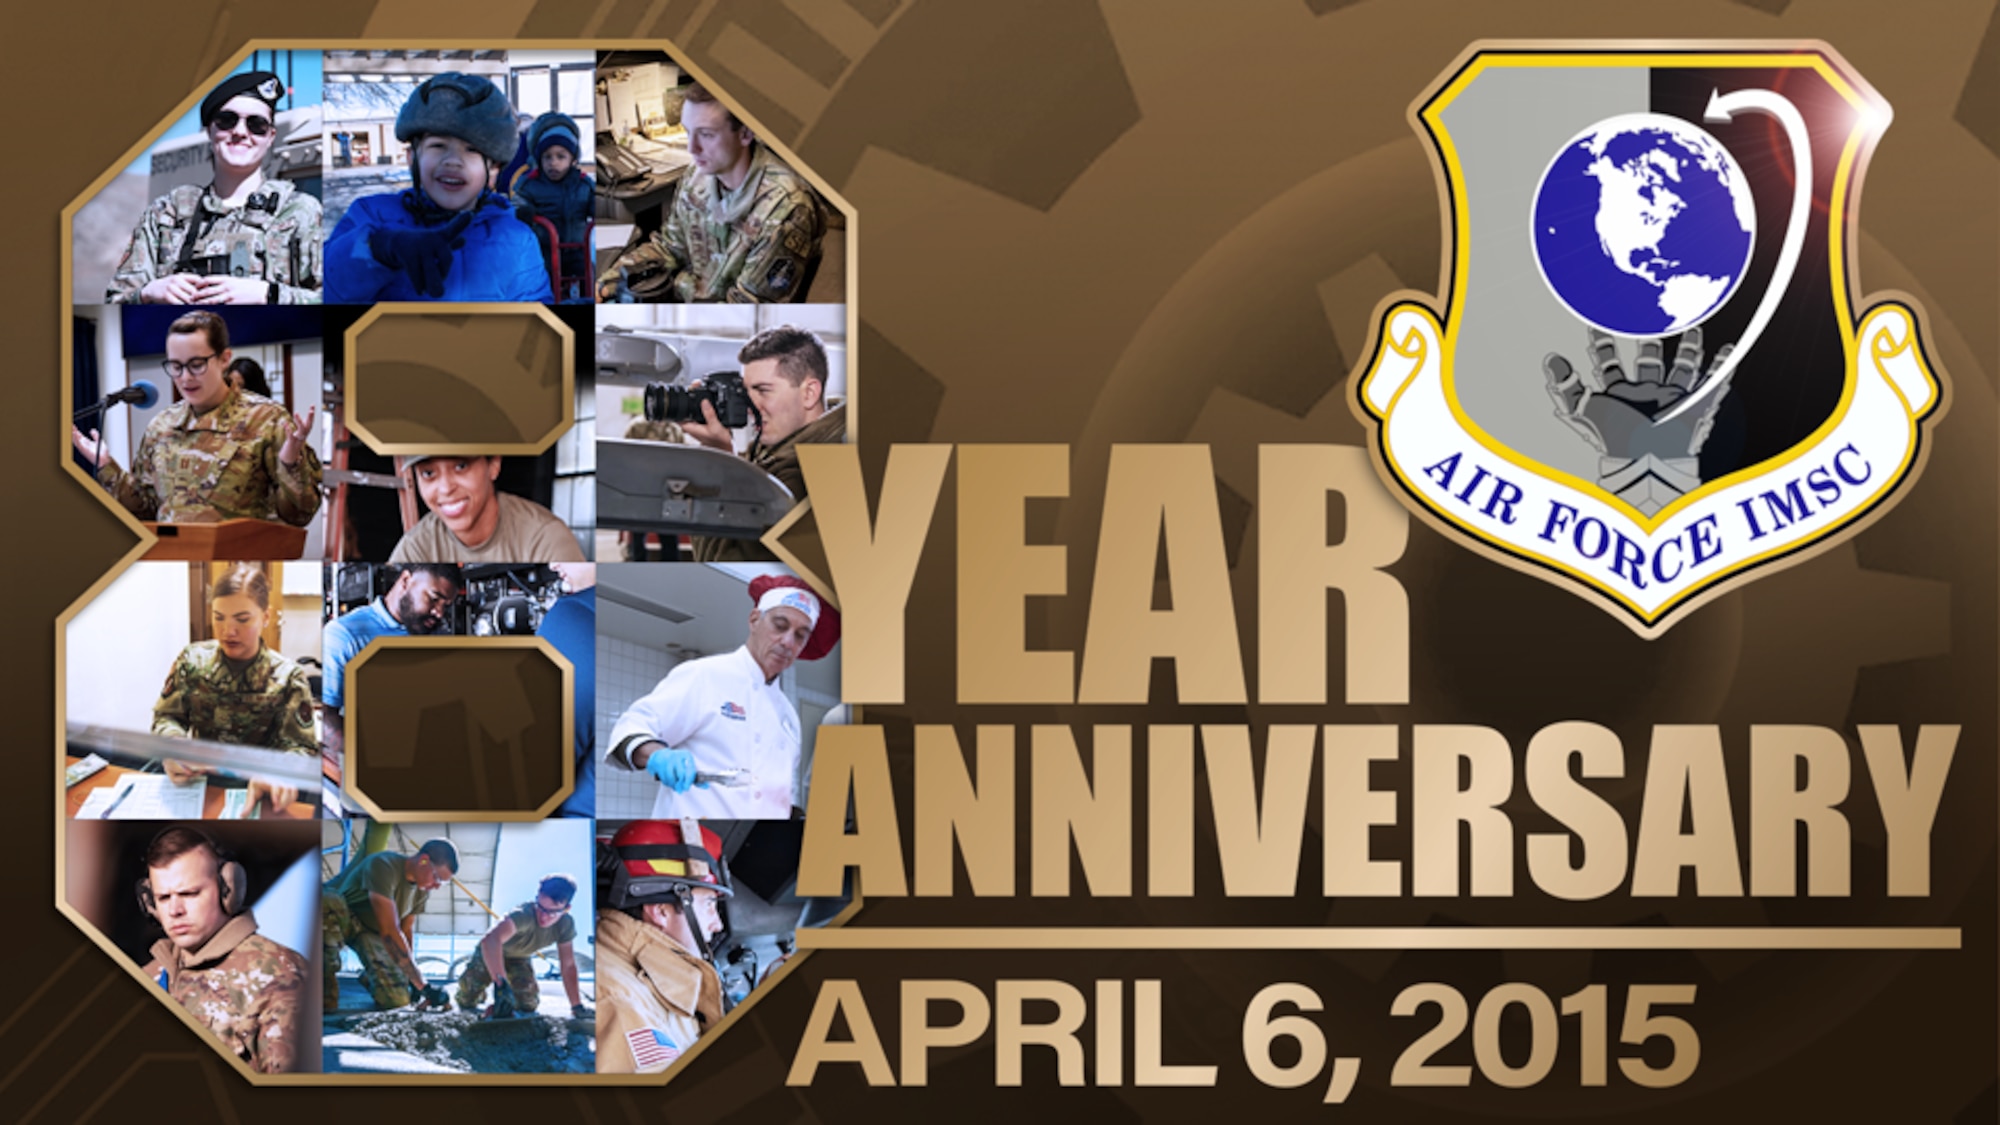 Eight years ago, on April 6, 2015, the Air Force activated the Air Force Installation and Mission Support Center, one of six specialized centers assigned to Air Force Materiel Command.